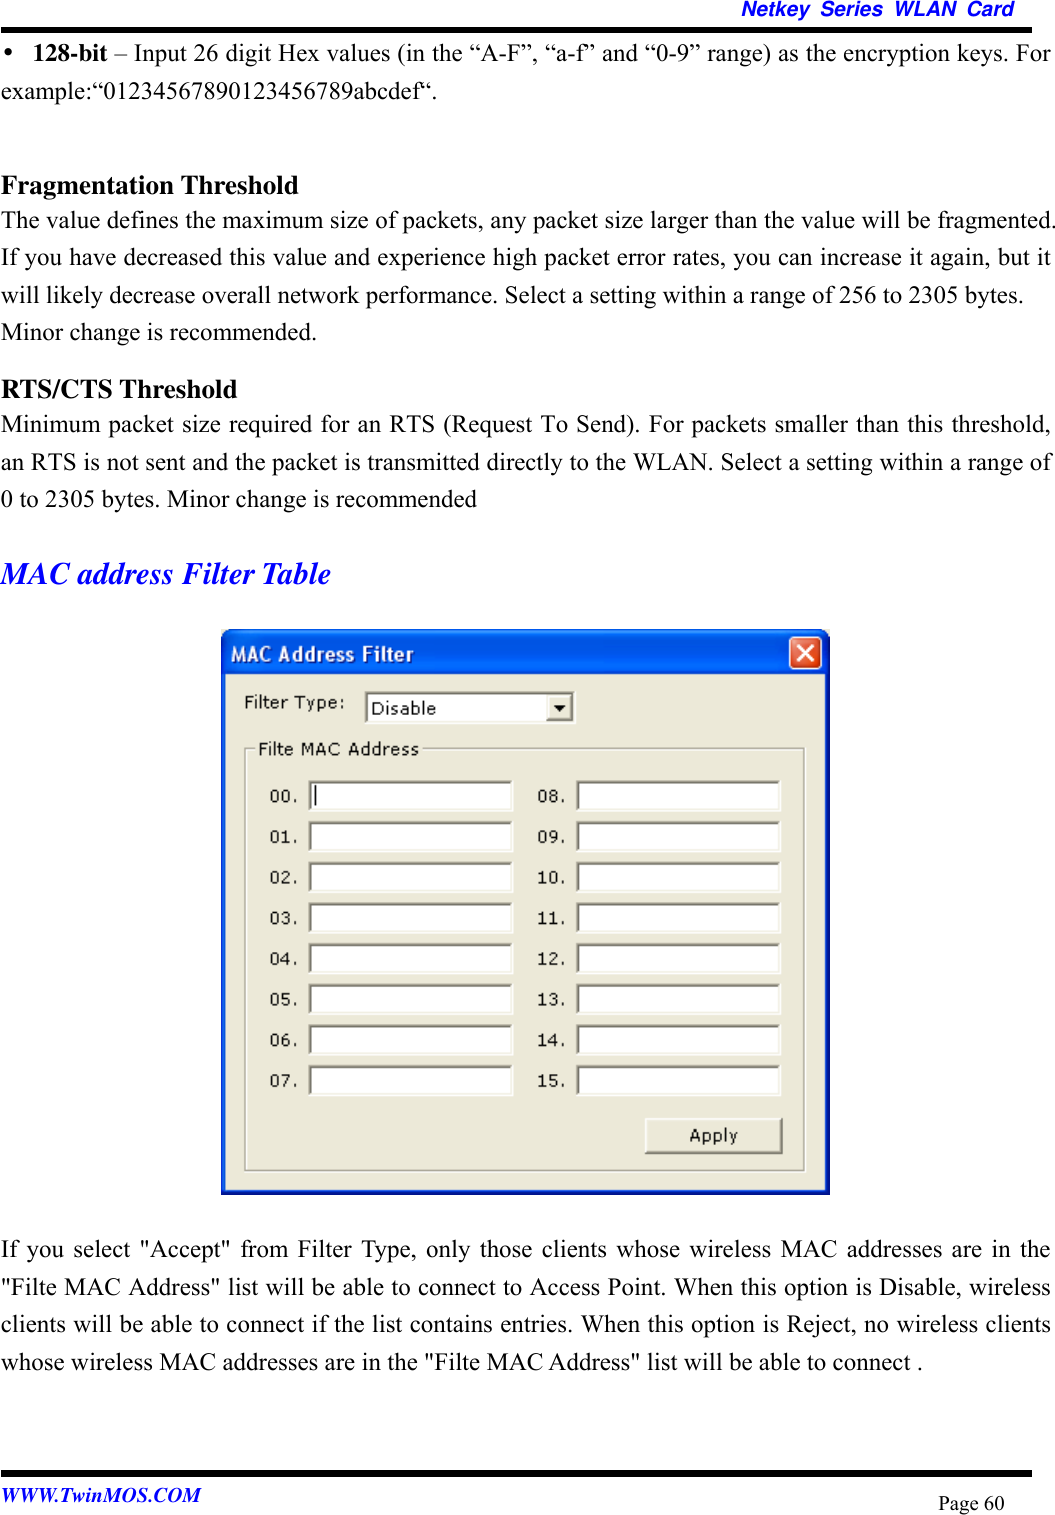   Netkey Series WLAN Card  •128-bit – Input 26 digit Hex values (in the “A-F”, “a-f” and “0-9” range) as the encryption keys. For example:“01234567890123456789abcdef“.  Fragmentation Threshold The value defines the maximum size of packets, any packet size larger than the value will be fragmented. If you have decreased this value and experience high packet error rates, you can increase it again, but it will likely decrease overall network performance. Select a setting within a range of 256 to 2305 bytes. Minor change is recommended. RTS/CTS Threshold Minimum packet size required for an RTS (Request To Send). For packets smaller than this threshold, an RTS is not sent and the packet is transmitted directly to the WLAN. Select a setting within a range of 0 to 2305 bytes. Minor change is recommended  MAC address Filter Table                   If you select &quot;Accept&quot; from Filter Type, only those clients whose wireless MAC addresses are in the &quot;Filte MAC Address&quot; list will be able to connect to Access Point. When this option is Disable, wireless clients will be able to connect if the list contains entries. When this option is Reject, no wireless clients whose wireless MAC addresses are in the &quot;Filte MAC Address&quot; list will be able to connect .   WWW.TwinMOS.COM  Page 60